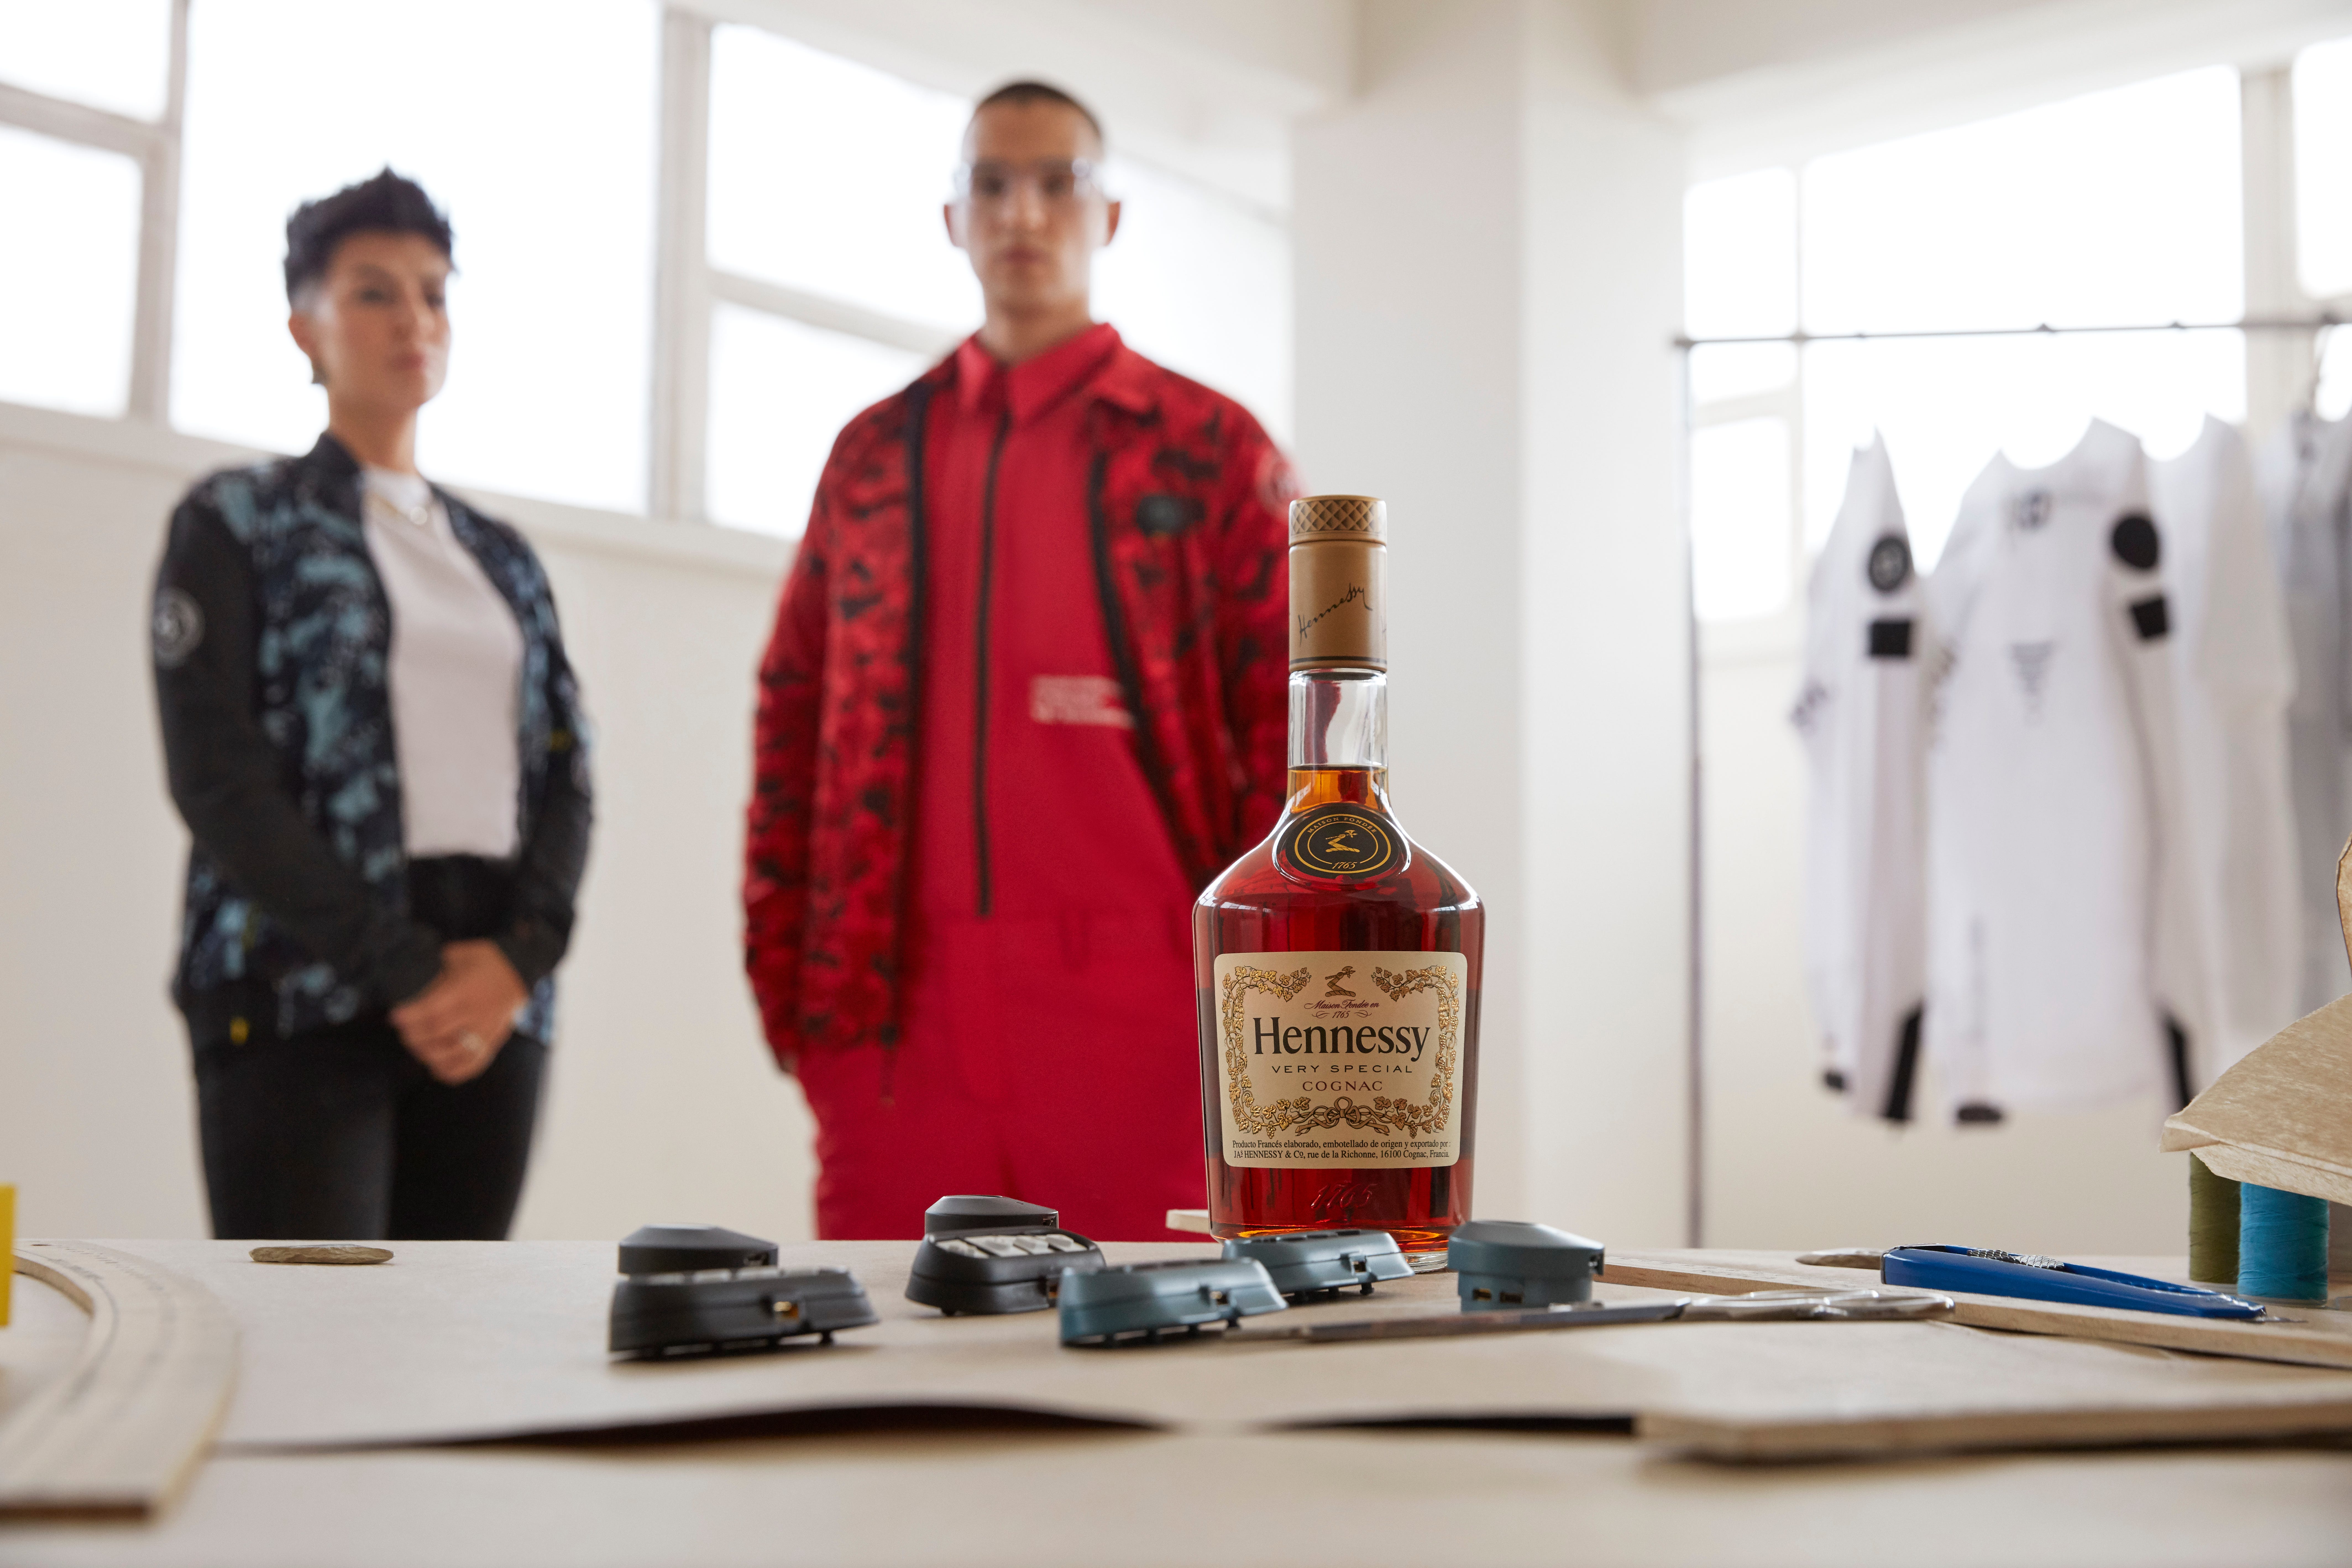 MACHINA CO-FOUNDERS FOR “HENNESSY VS ALL I NEED” CAMPAIGN, by Machina WT